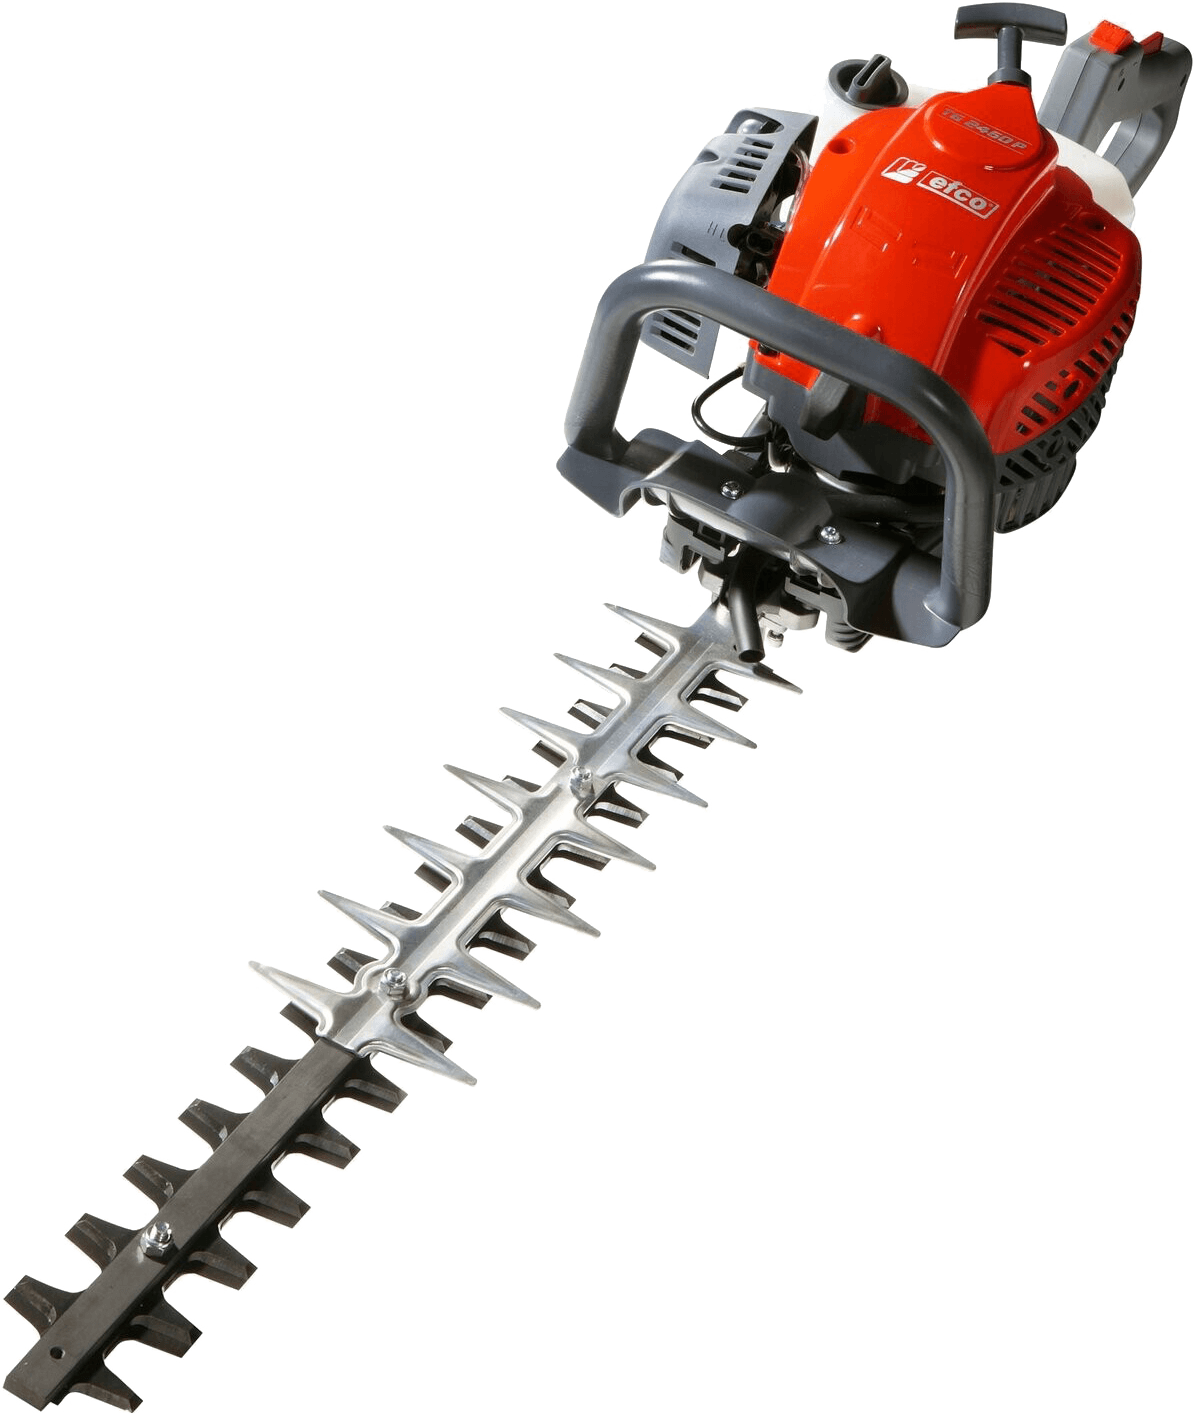 https://www.efcopower.com/products/HEDGE-TRIMMERS-c77469117